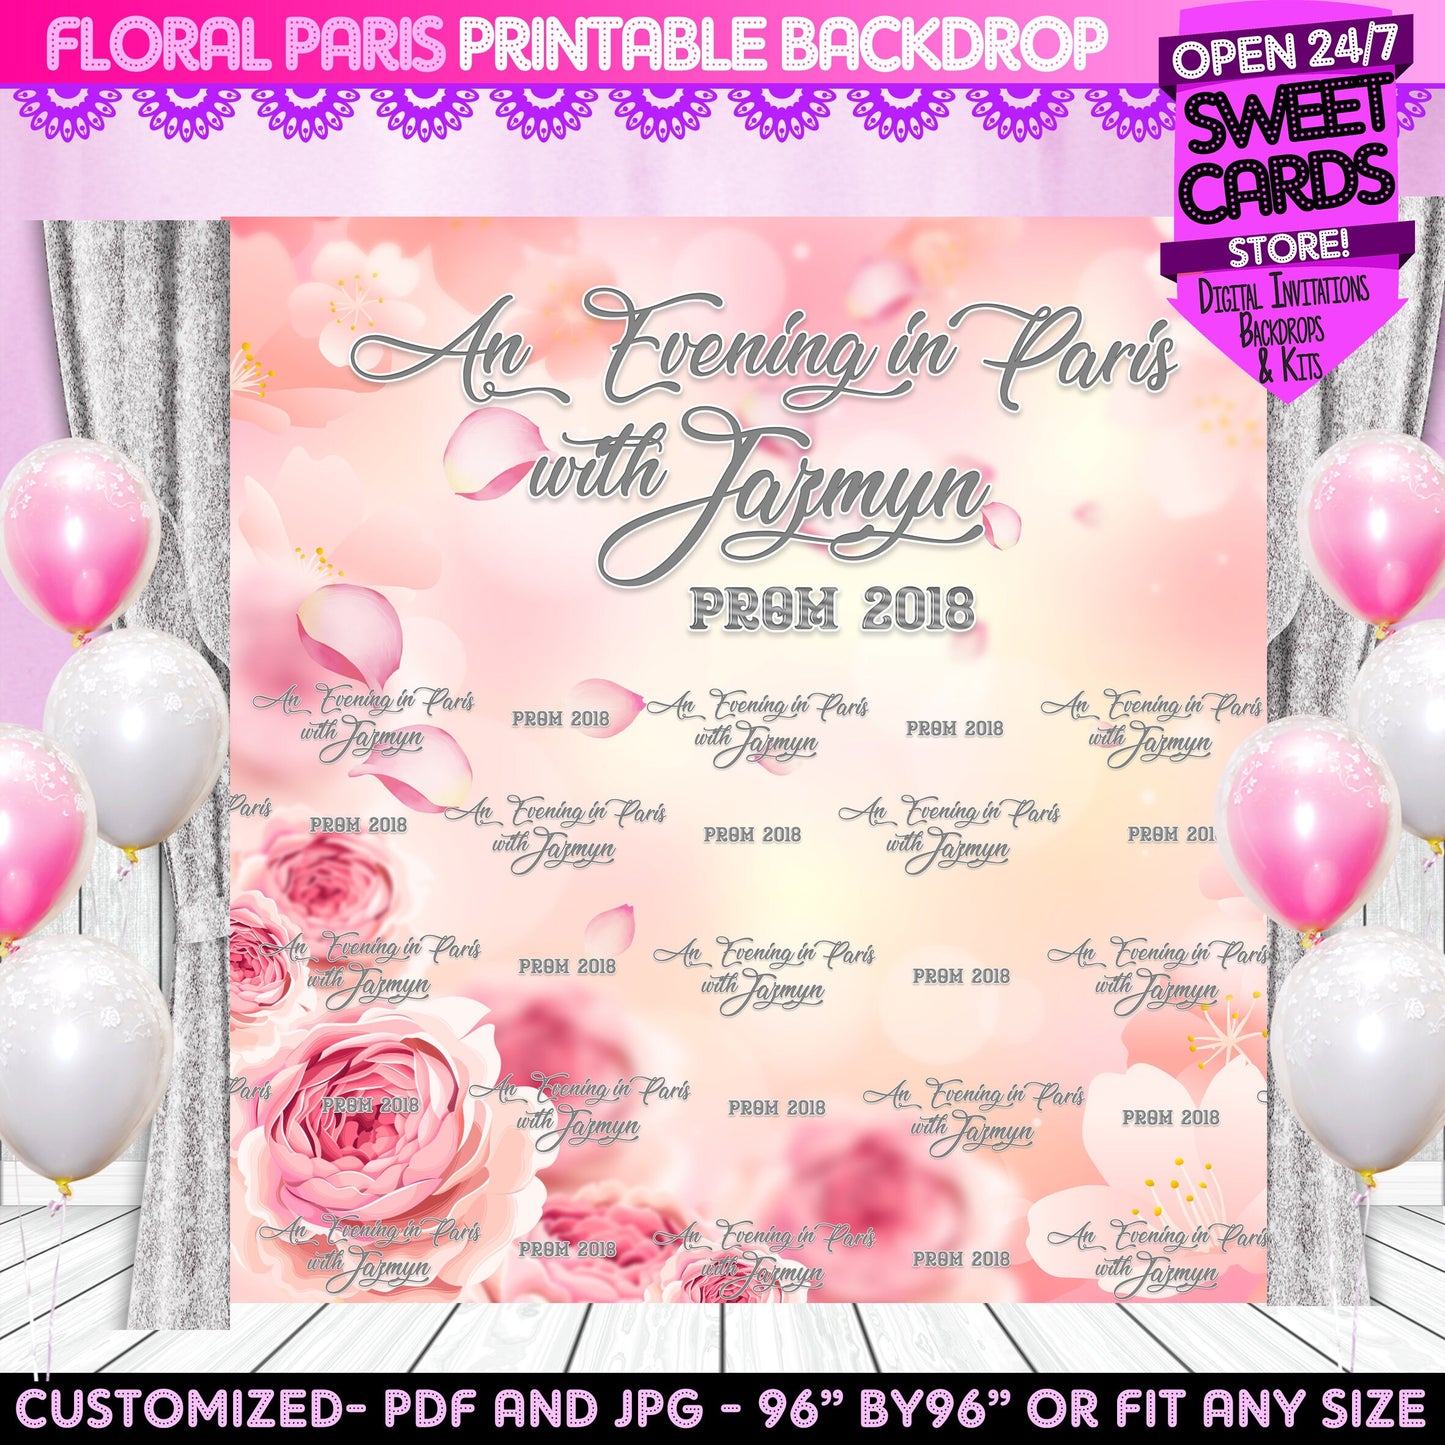 Evening in paris Floral Printable backdrop, Floral silver printable backdrop, Floral photo backdrop, Petals Photo backdrop, Step and repeat